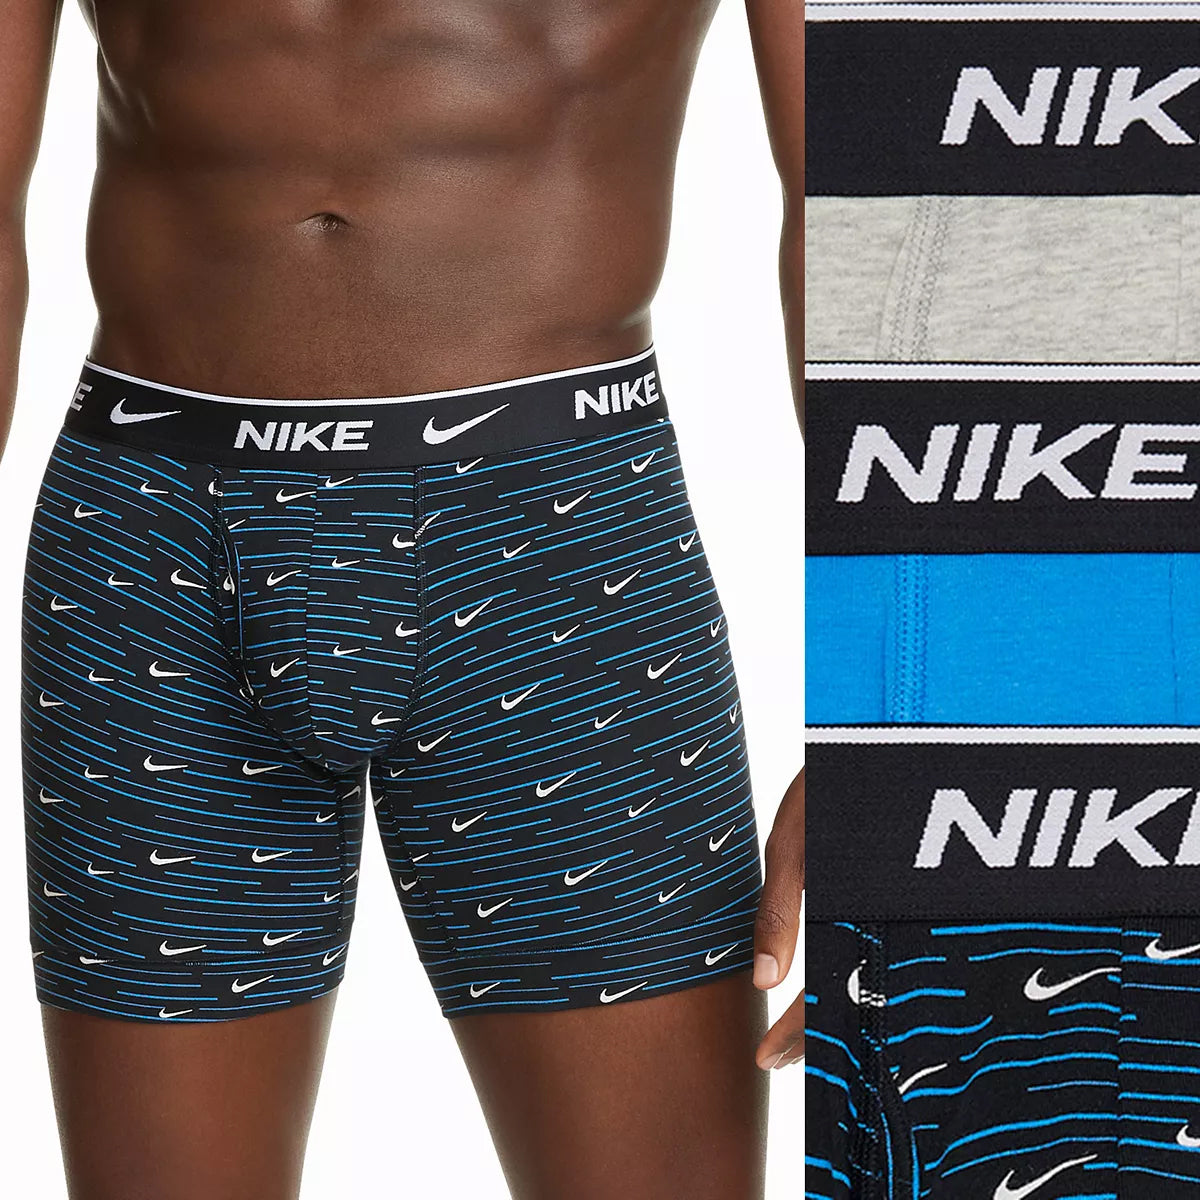 Boxer shorts Nike Dri-FIT Everyday Cotton Stretch Trunk 3-Pack